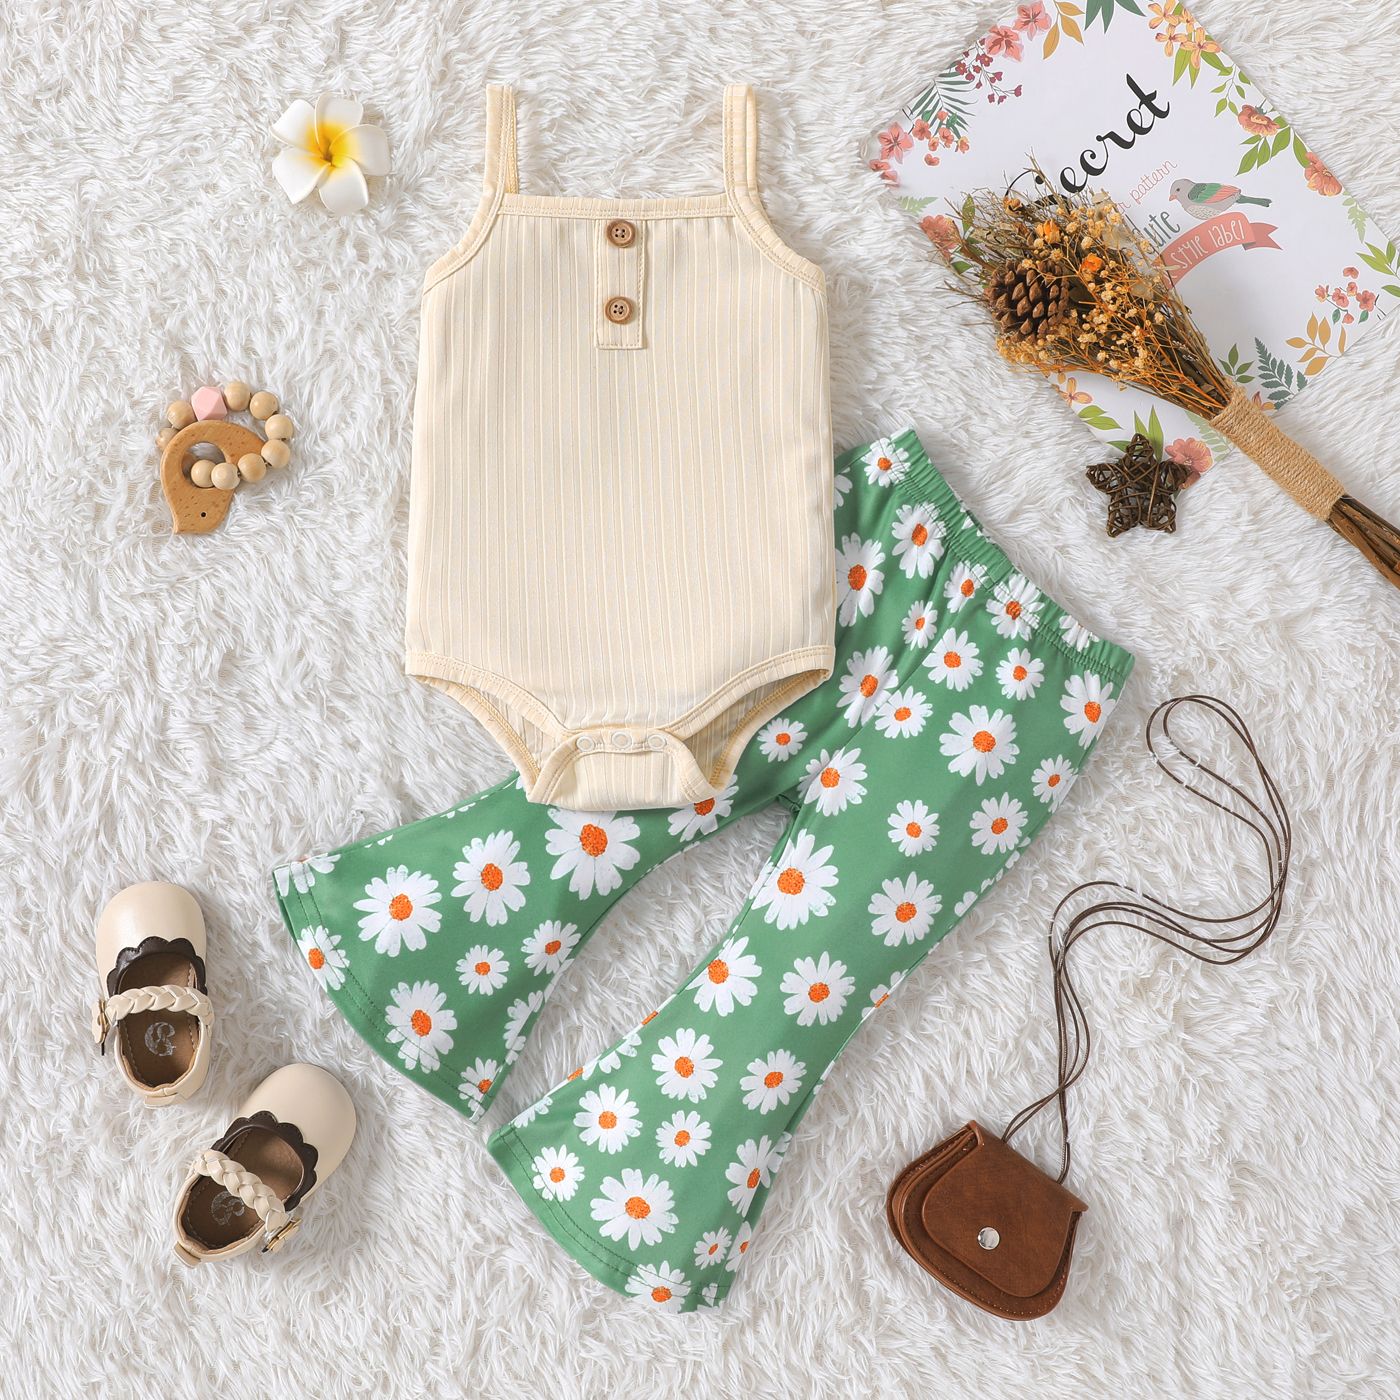 

2pcs Baby Girl Ribbed Spaghetti Strap Romper and Allover Daisy Floral Print Flared Pants Set